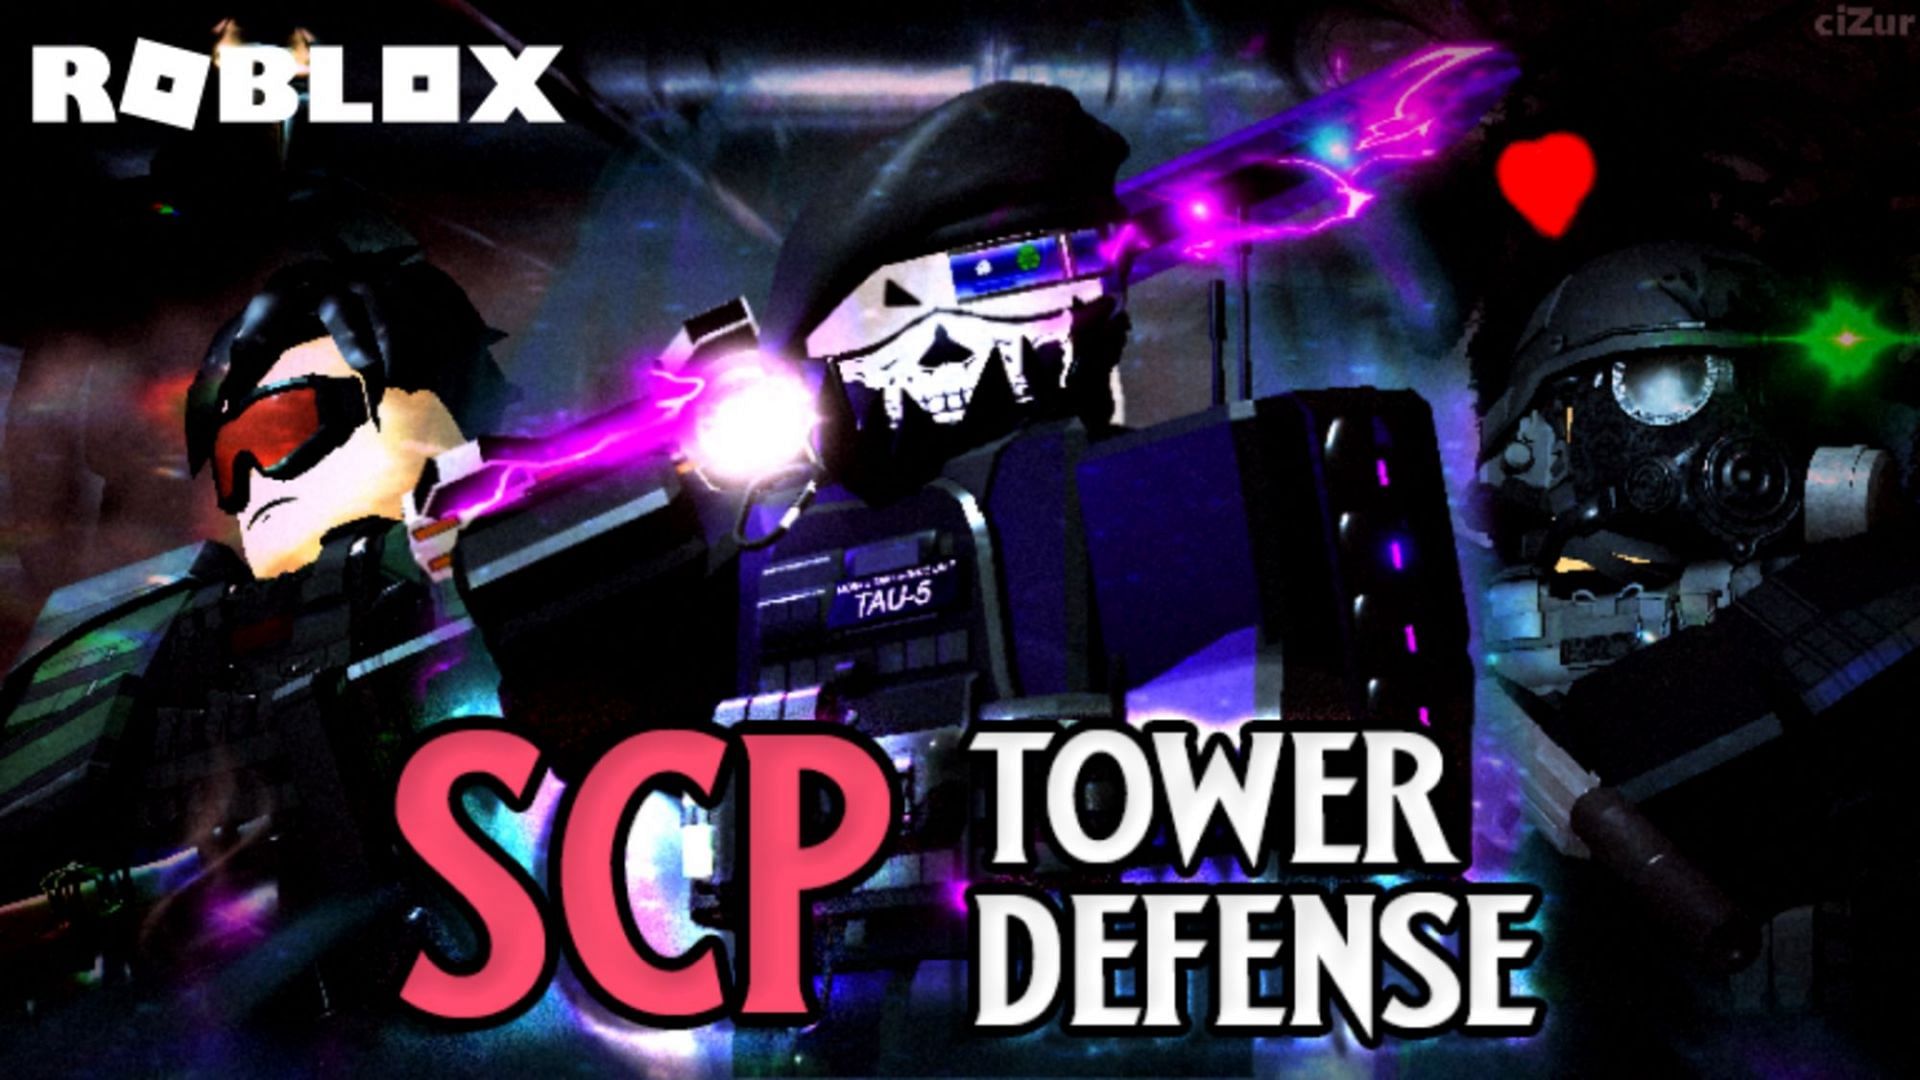 NEW* ALL WORKING CODES FOR TOWER DEFENSE SIMULATOR 2022! ROBLOX